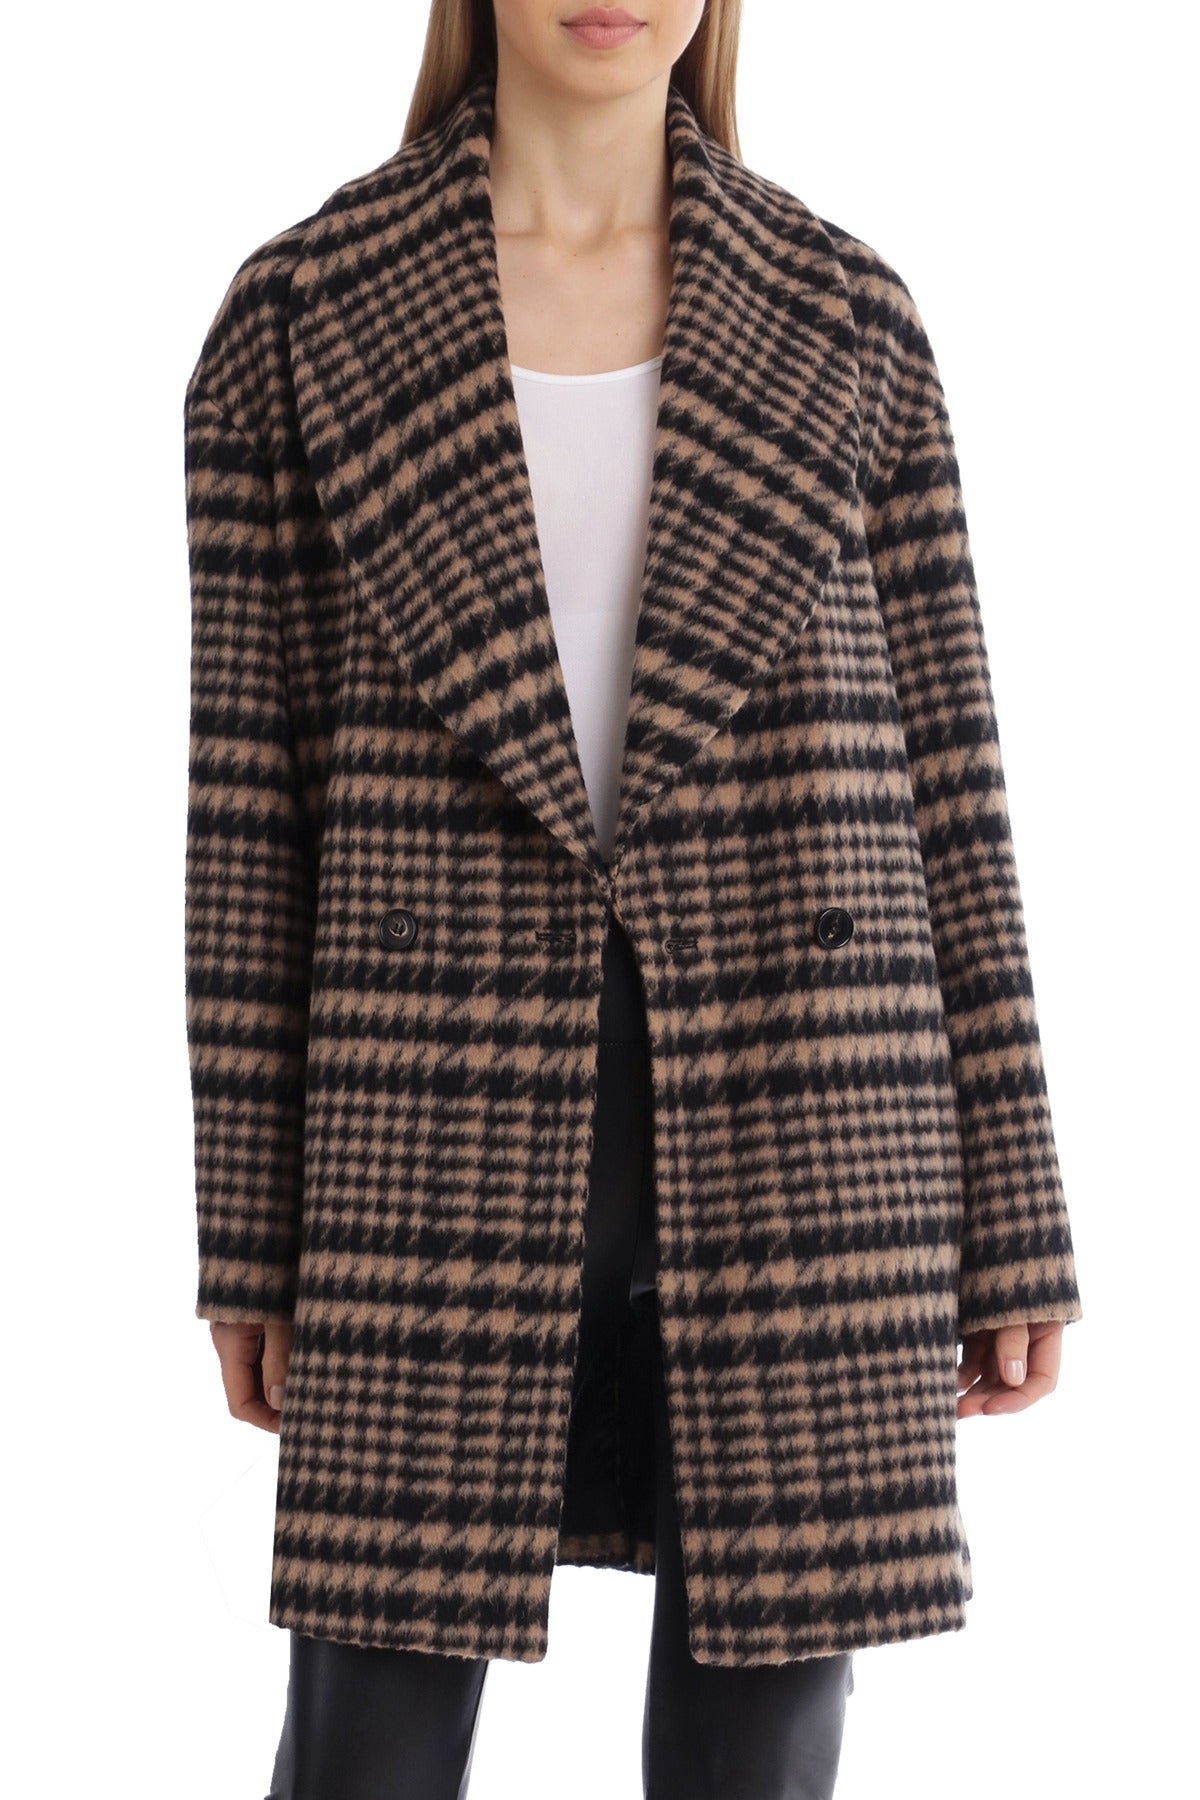 Houndstooth plaid oversized women's flattering fashion peacoat outerwear Avec Les Filles camel brown and black coat  